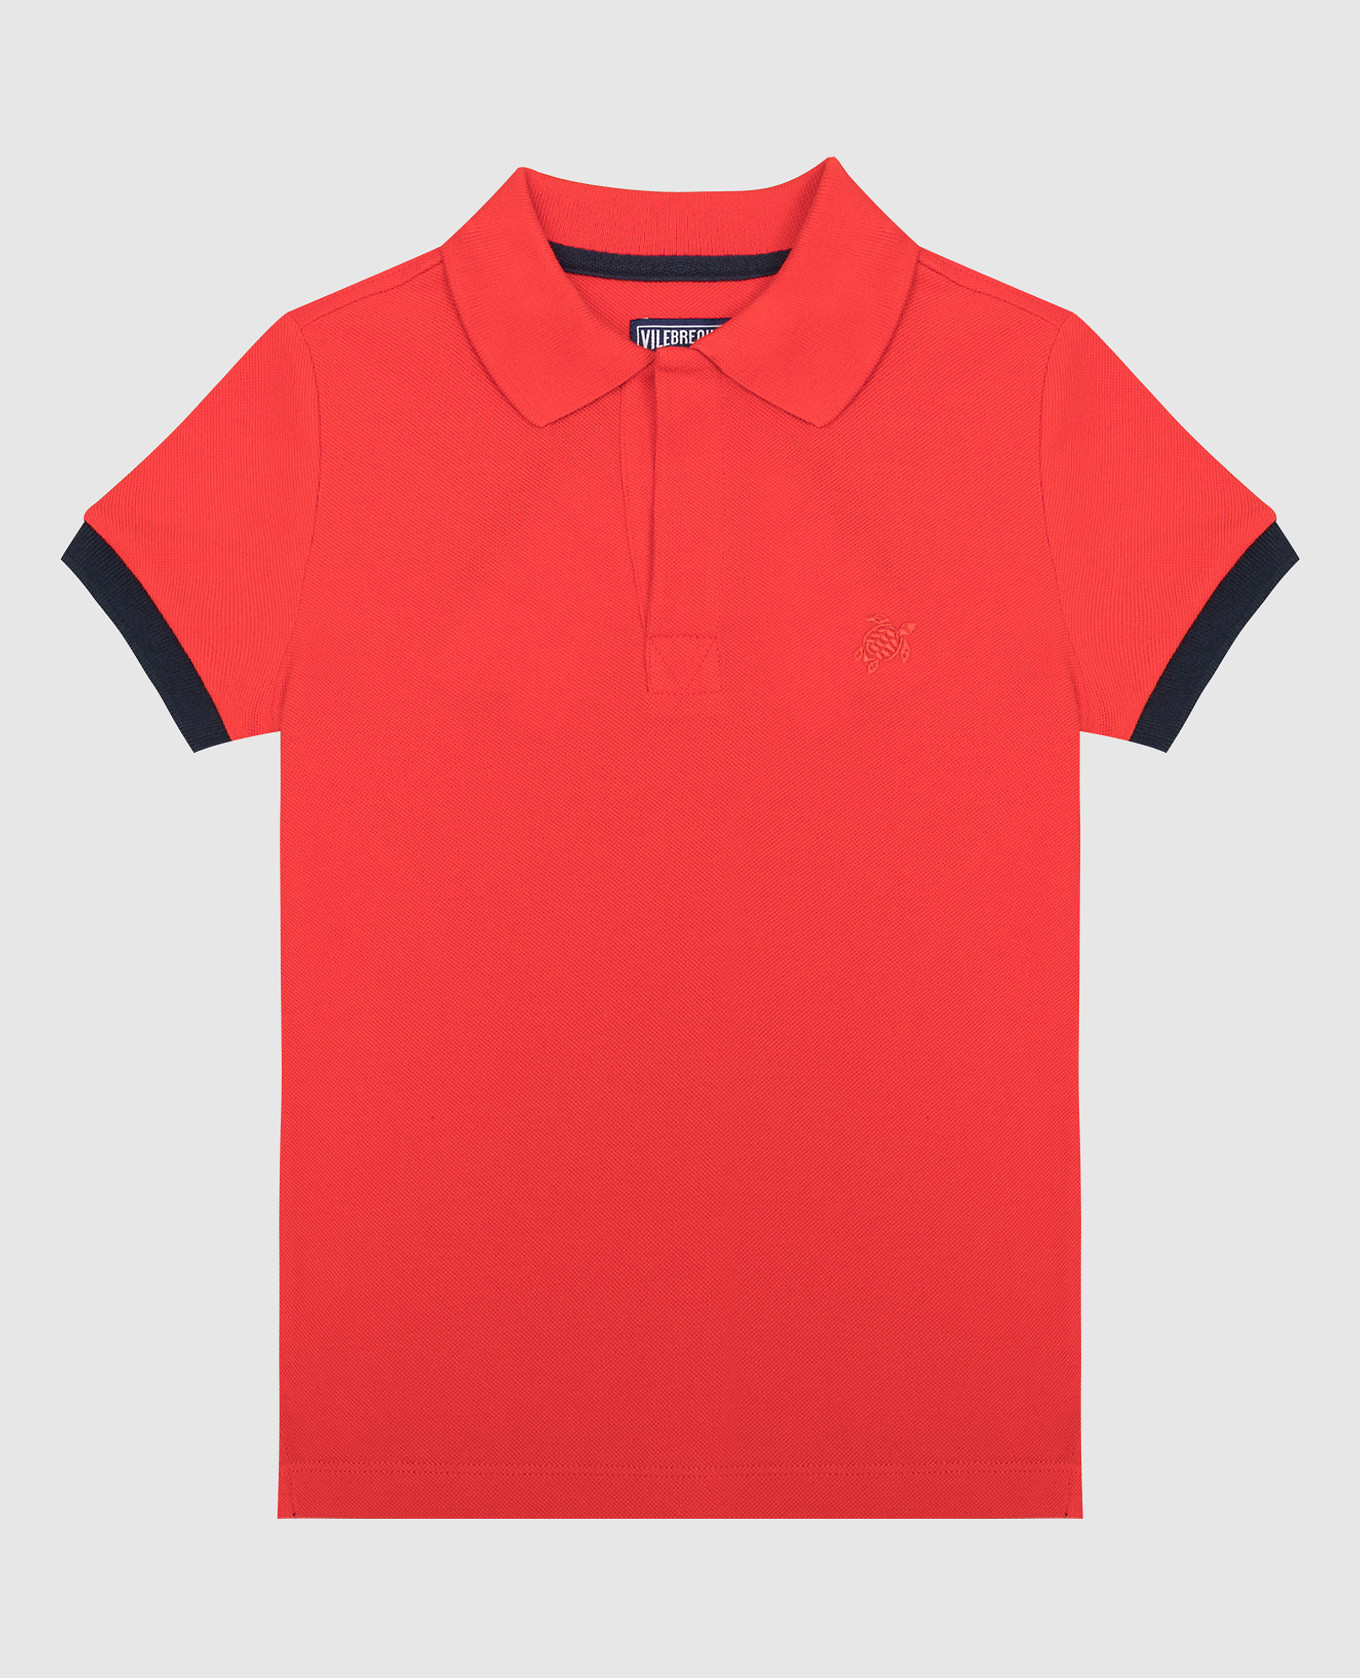 Pantin red logo embroidered polo shirt for kids